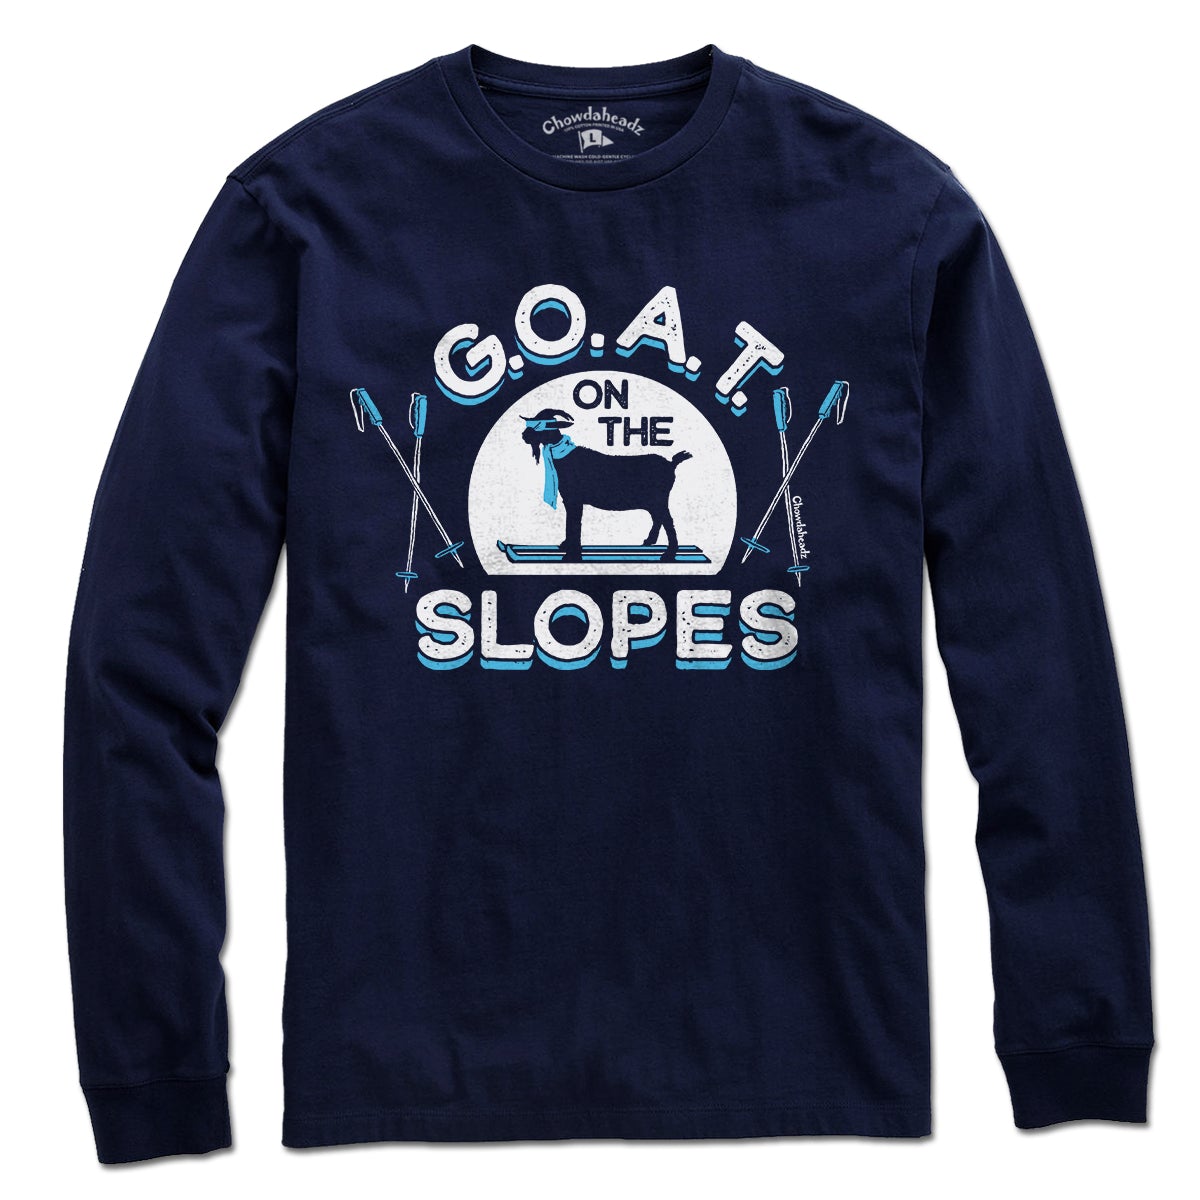 G.O.A.T On The Slopes T-Shirt - Chowdaheadz